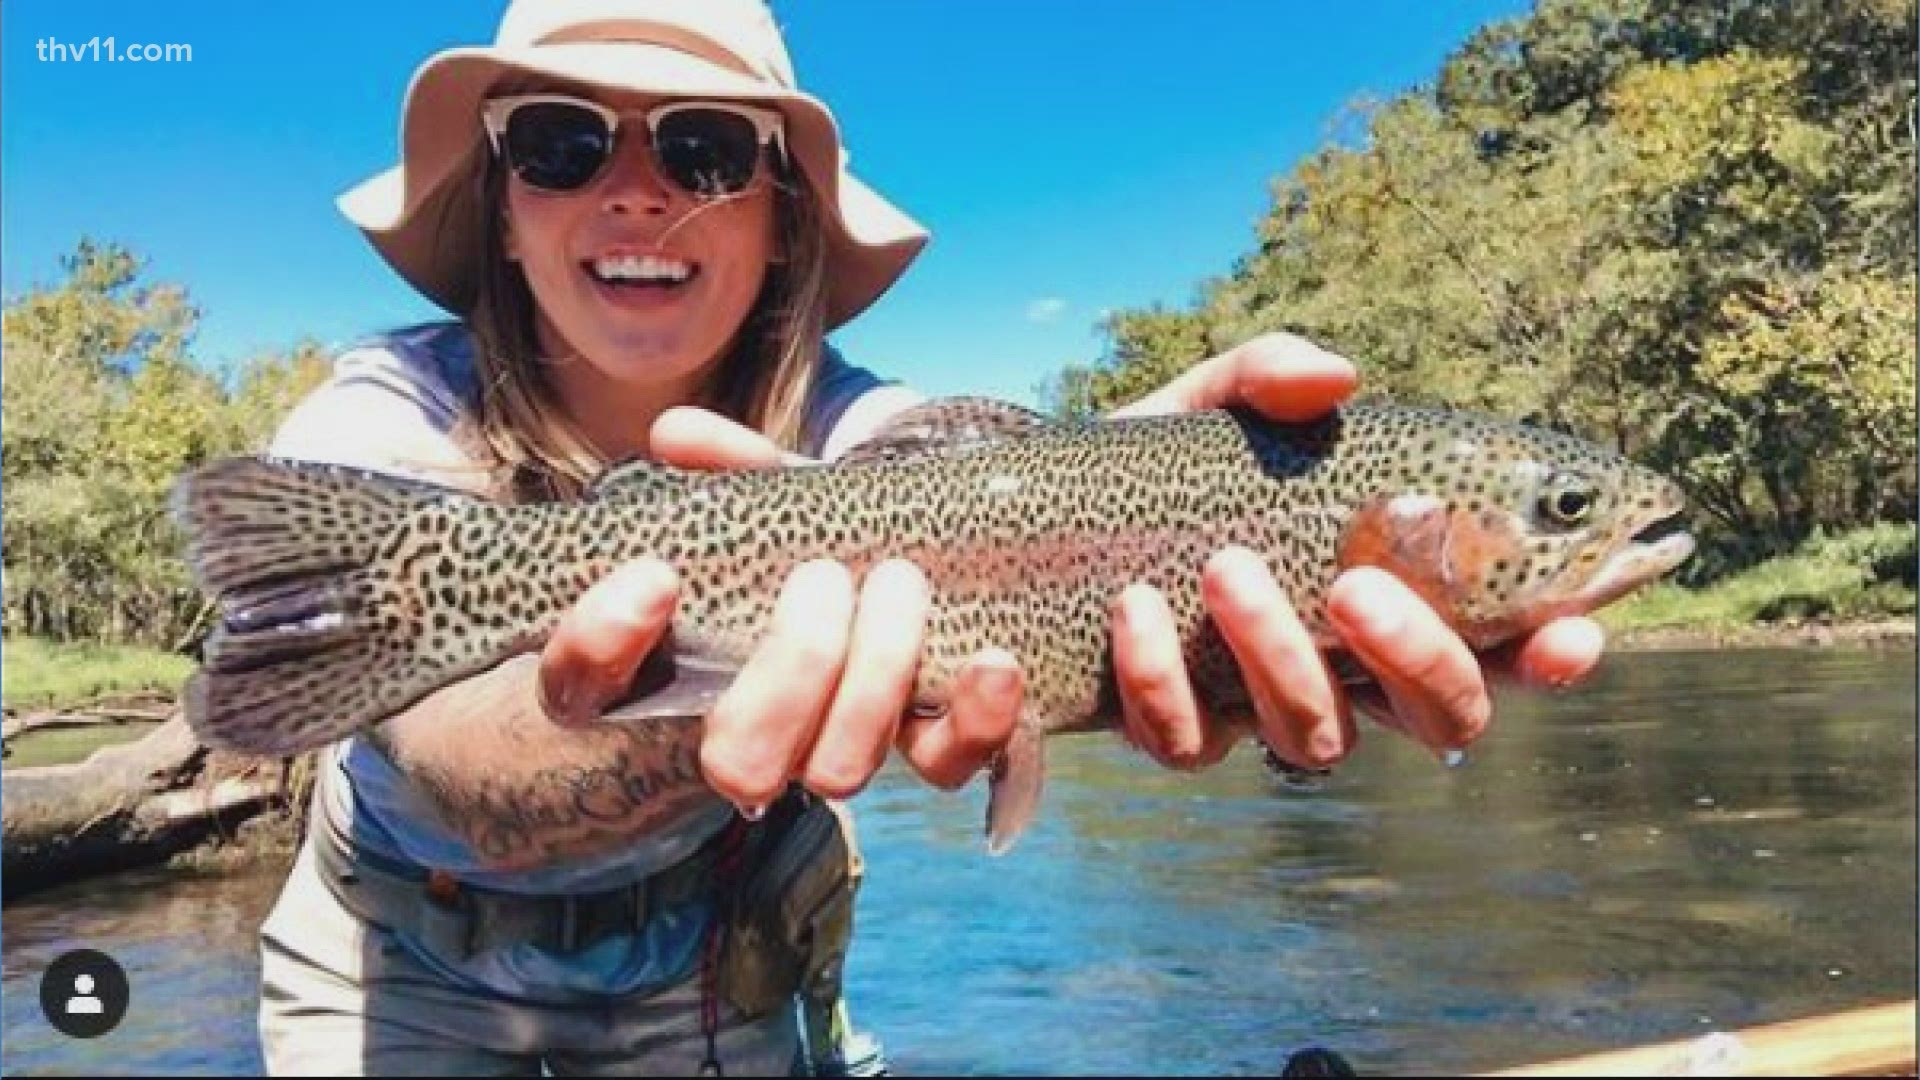 Full trout lady video